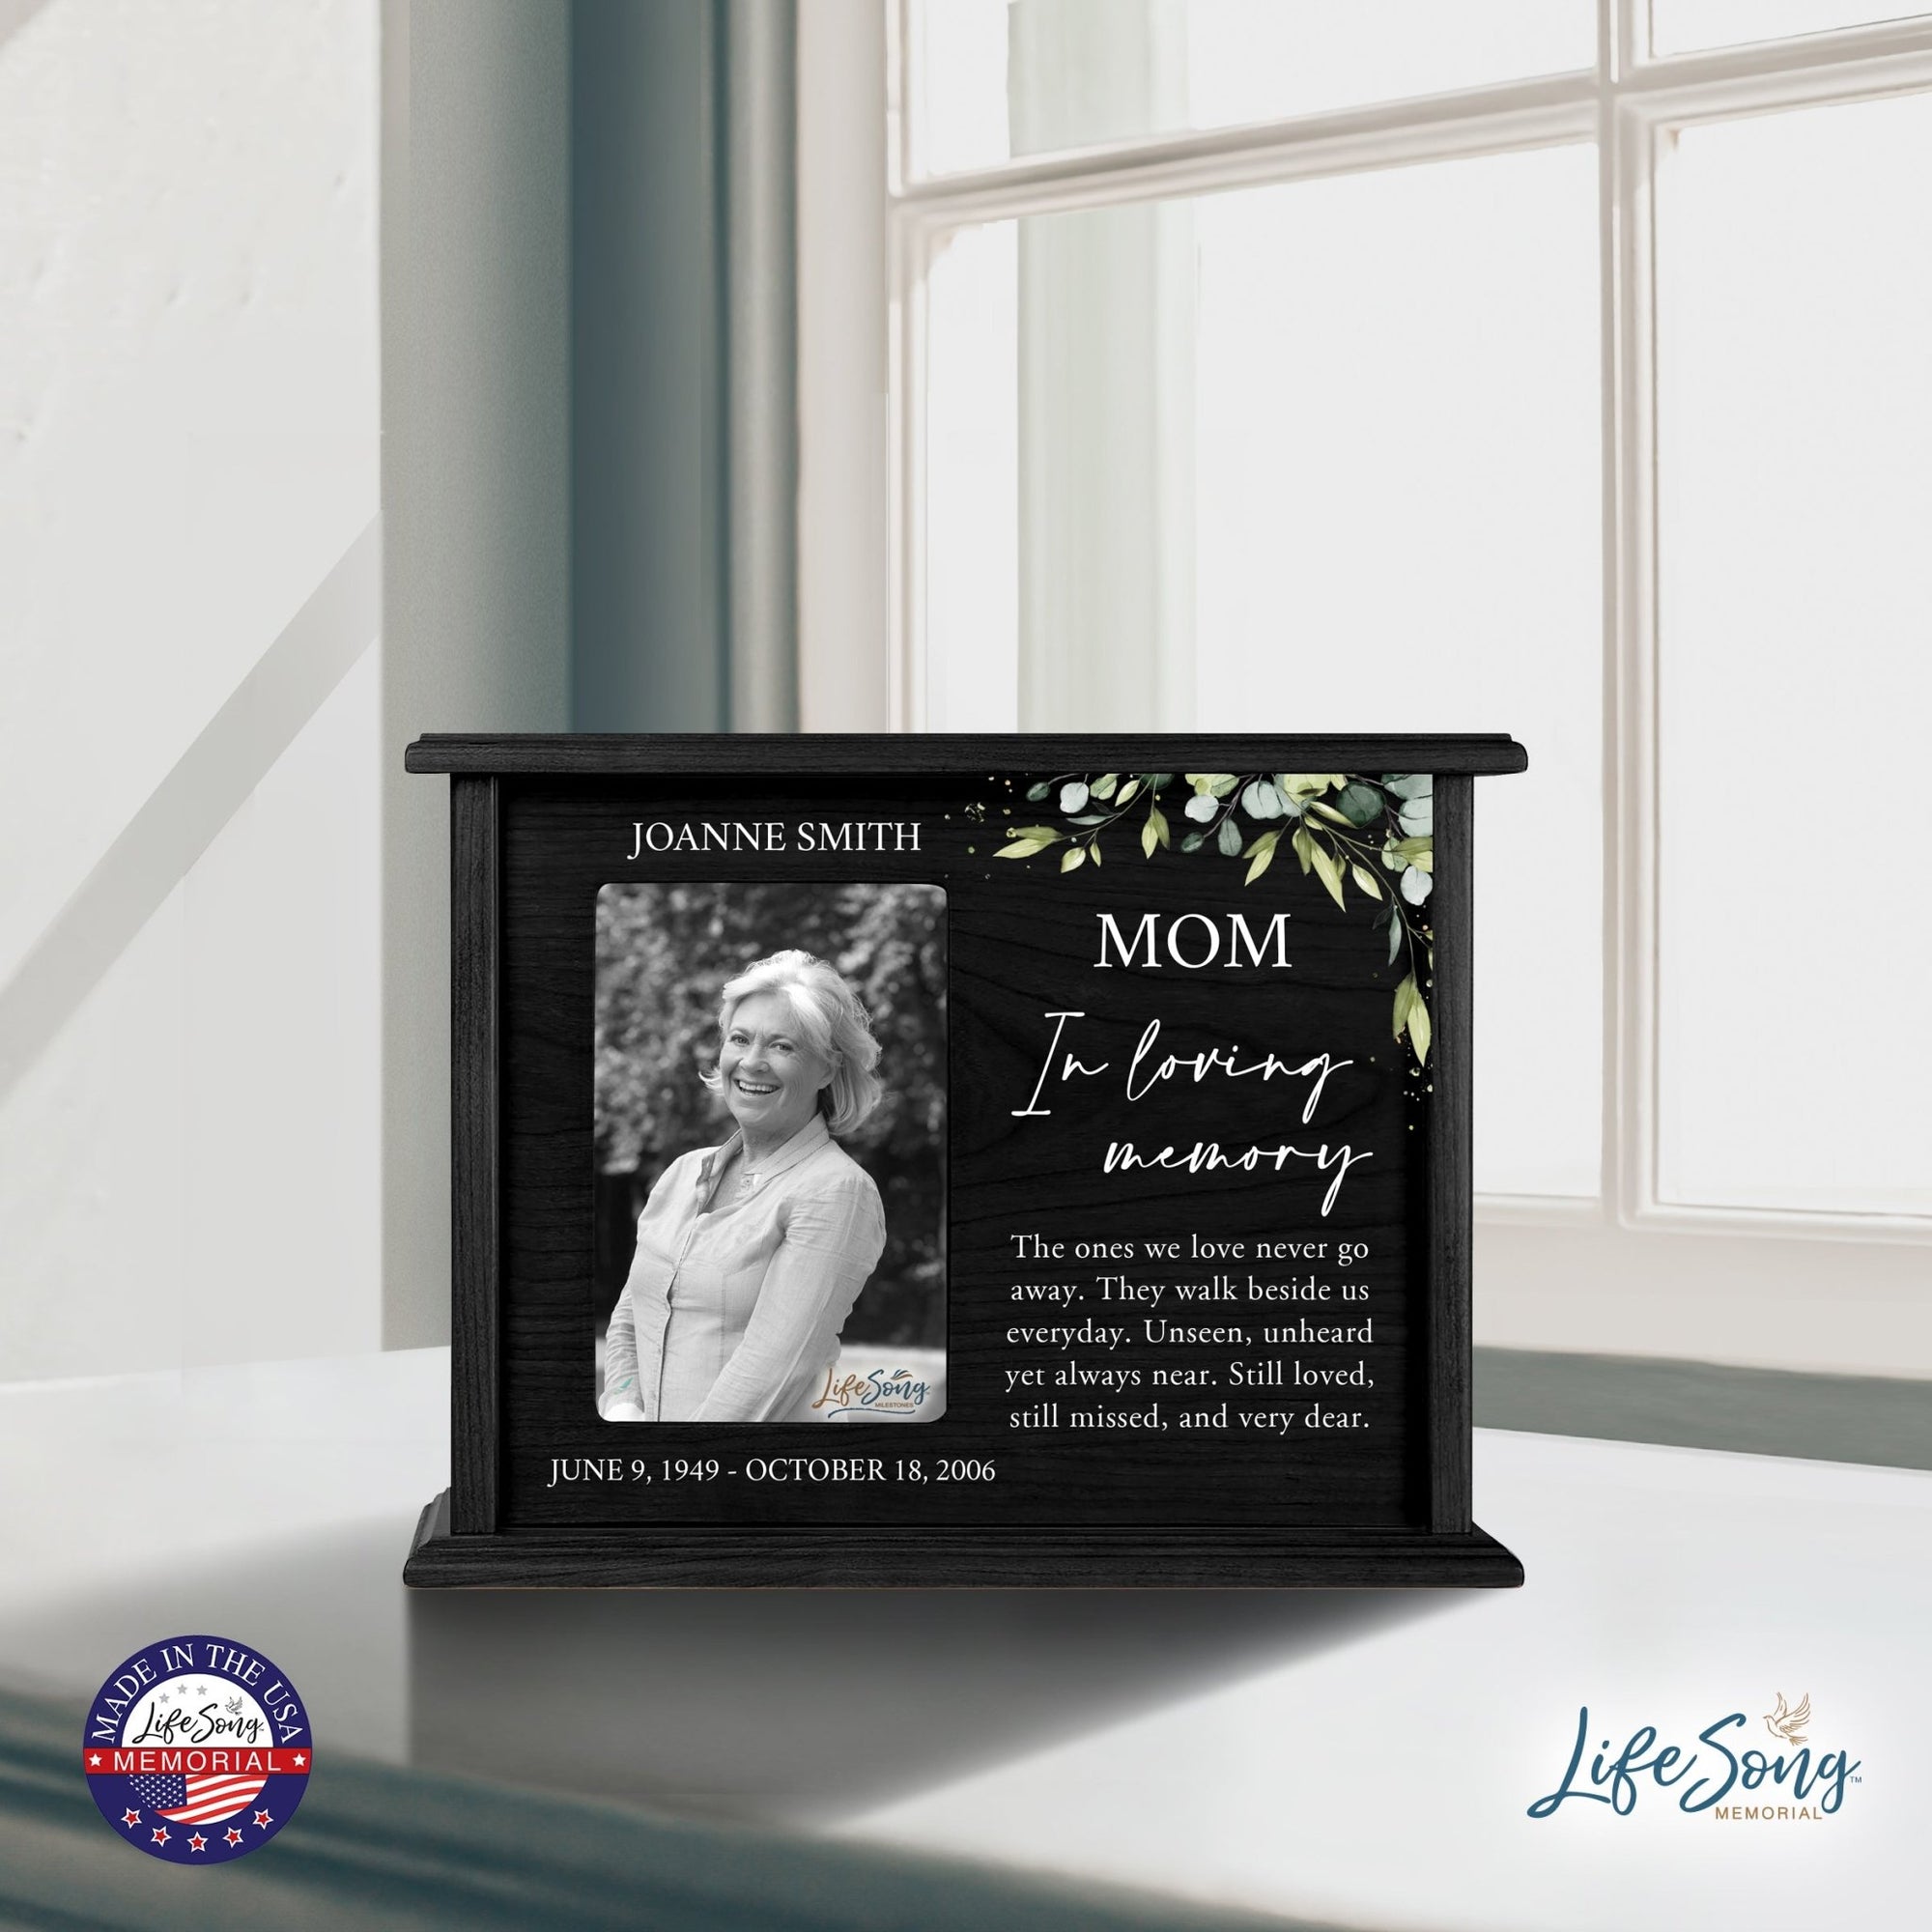 Personalized Memorial Cherry Wood 12 x 4.5 x 9 Cremation Urn Box with Picture Frame holds 200 cu in of Human Ashes and 4x6 Photo - In Loving Memory (Black) - LifeSong Milestones